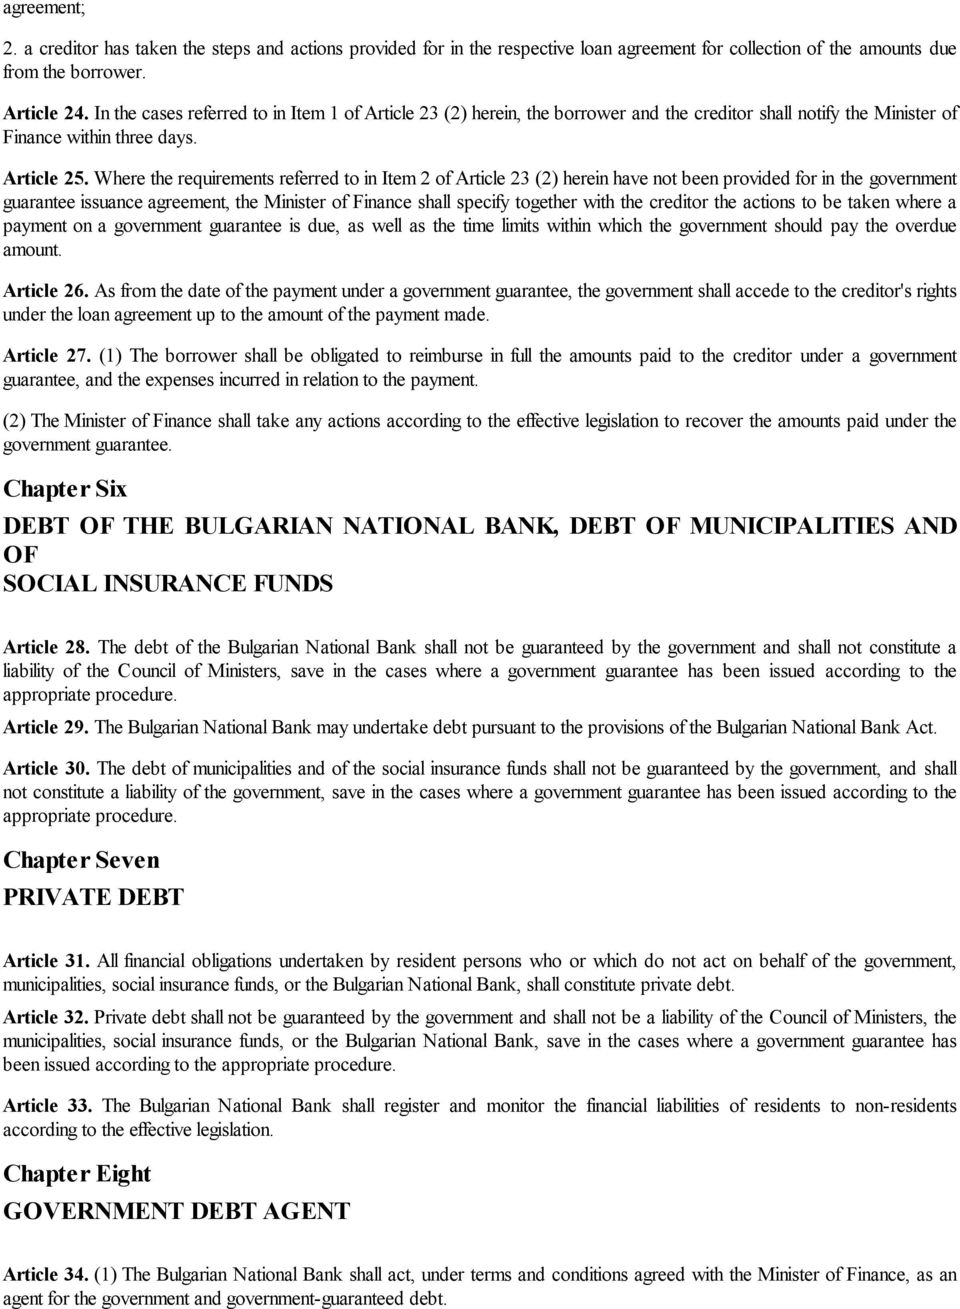 Where the requirements referred to in Item 2 of Article 23 (2) herein have not been provided for in the government guarantee issuance agreement, the Minister of Finance shall specify together with